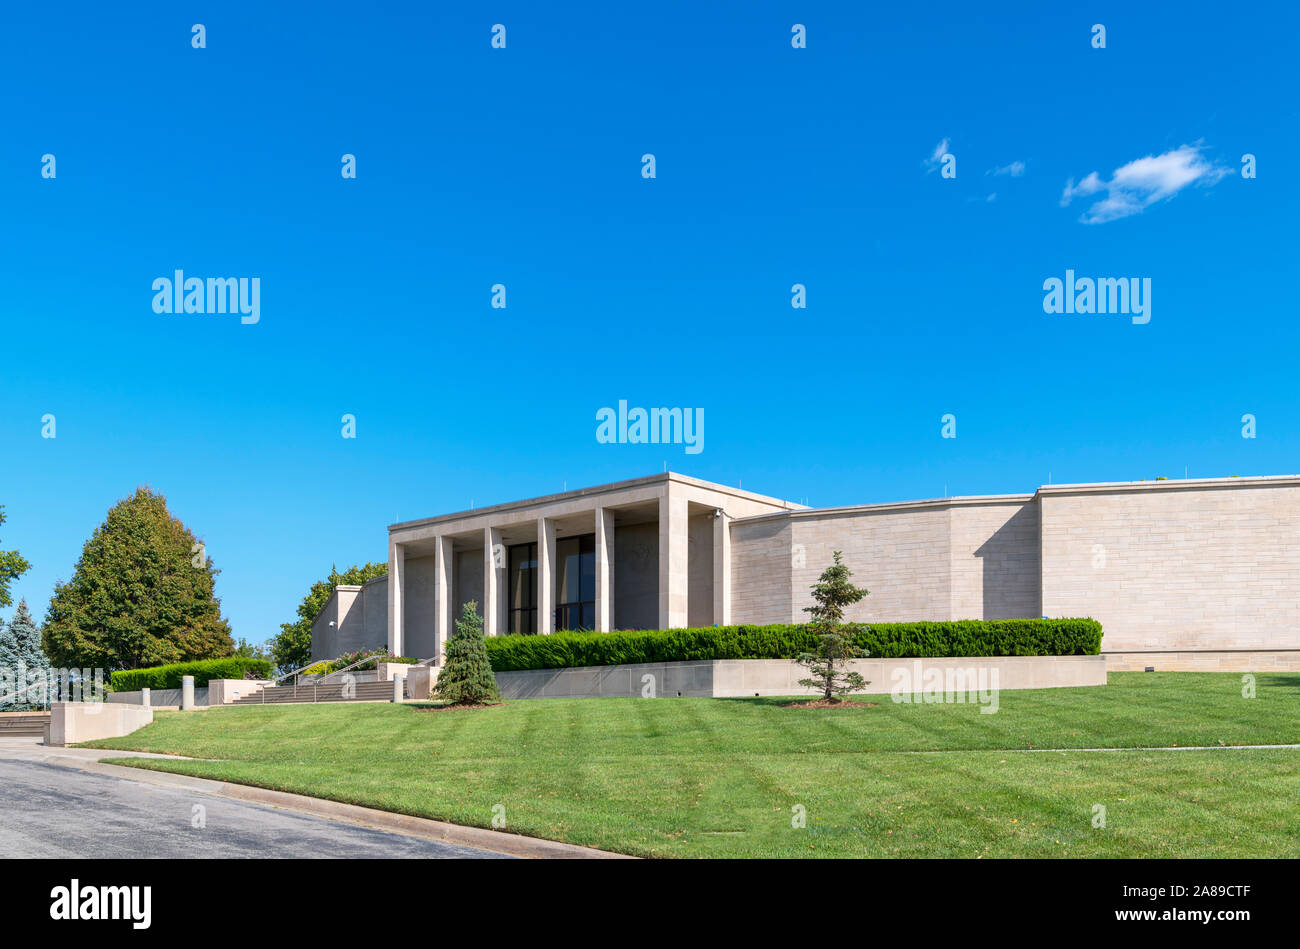 Harry S. Truman Presidential Library and Museum, Independence, Missouri, USA Banque D'Images